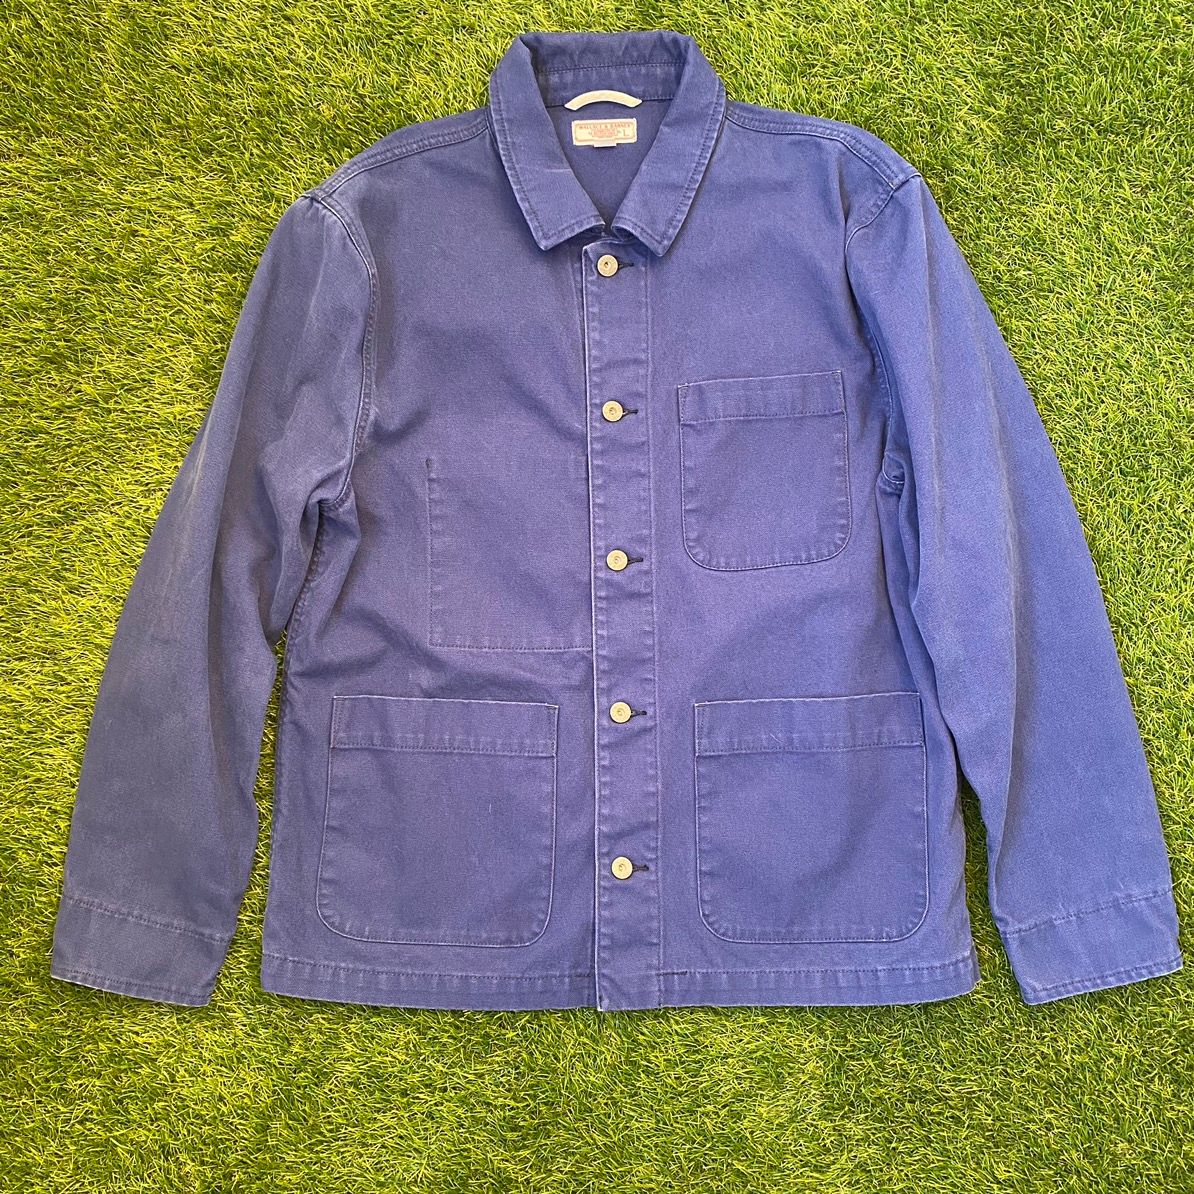 Vintage Wallace and Barnes Canvas French Chore Coat | Grailed